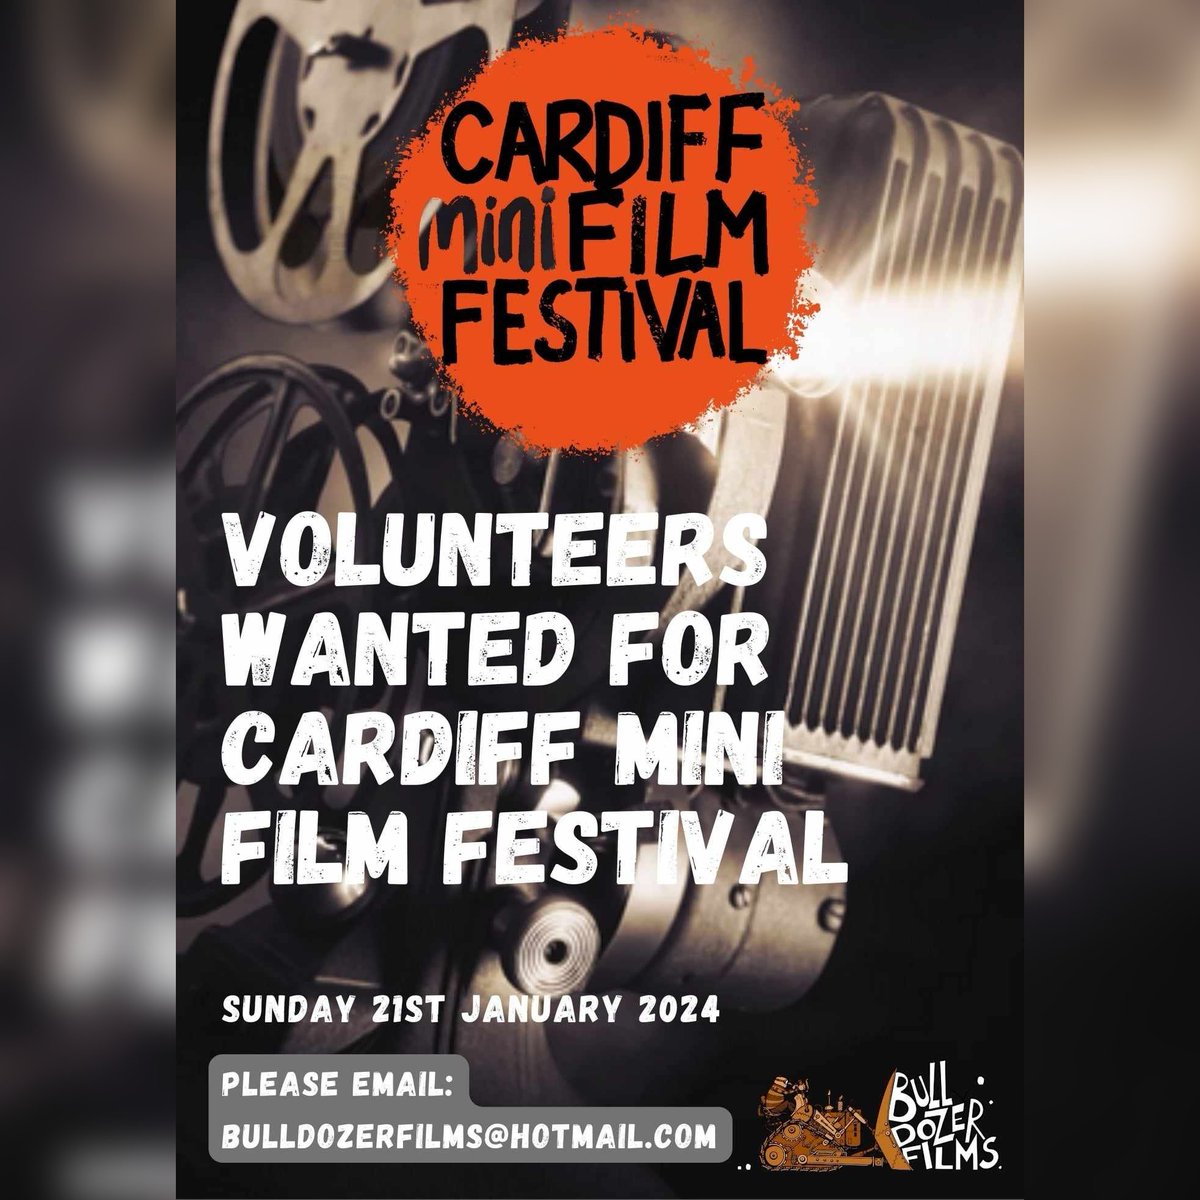 WANTED! Volunteers for Cardiff Mini Film Festival 📽️ Date: Sunday 21st January 2024 📅 Location: Clwb Ifor Bach 📍 If you'd like to help out at our screenings, awards and networking day please email: bulldozerfilms@hotmail.com